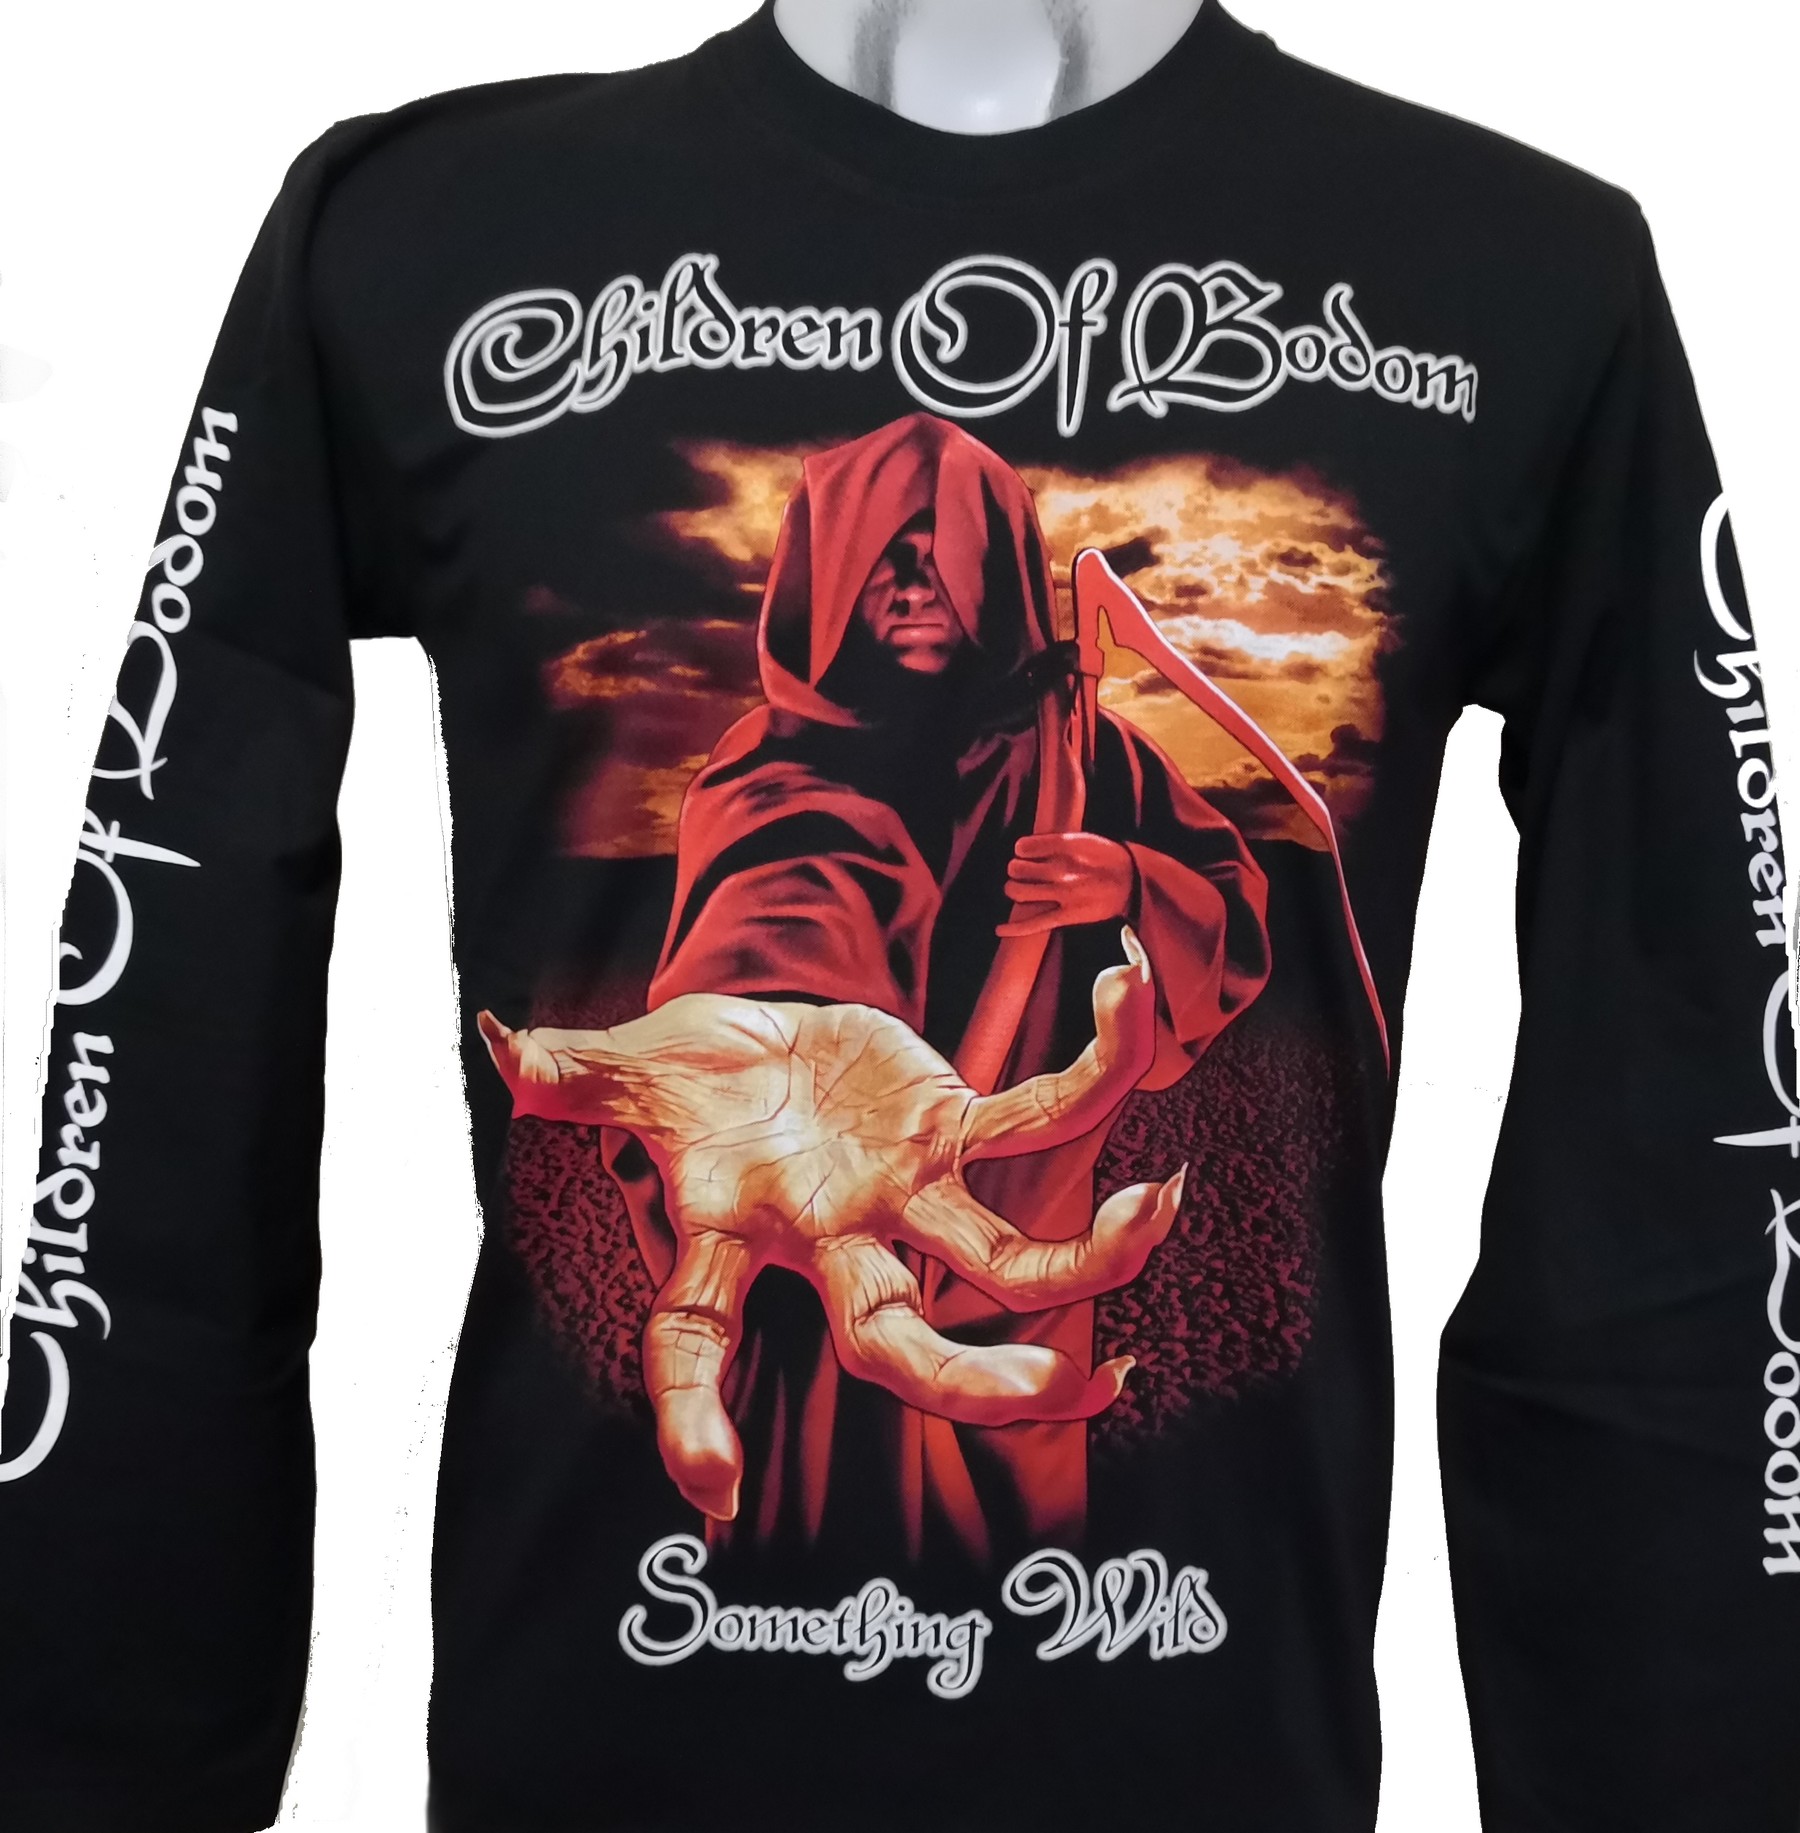 Calculation culture Requirements Children of Bodom long-sleeved t-shirt Something Wild size L – RoxxBKK